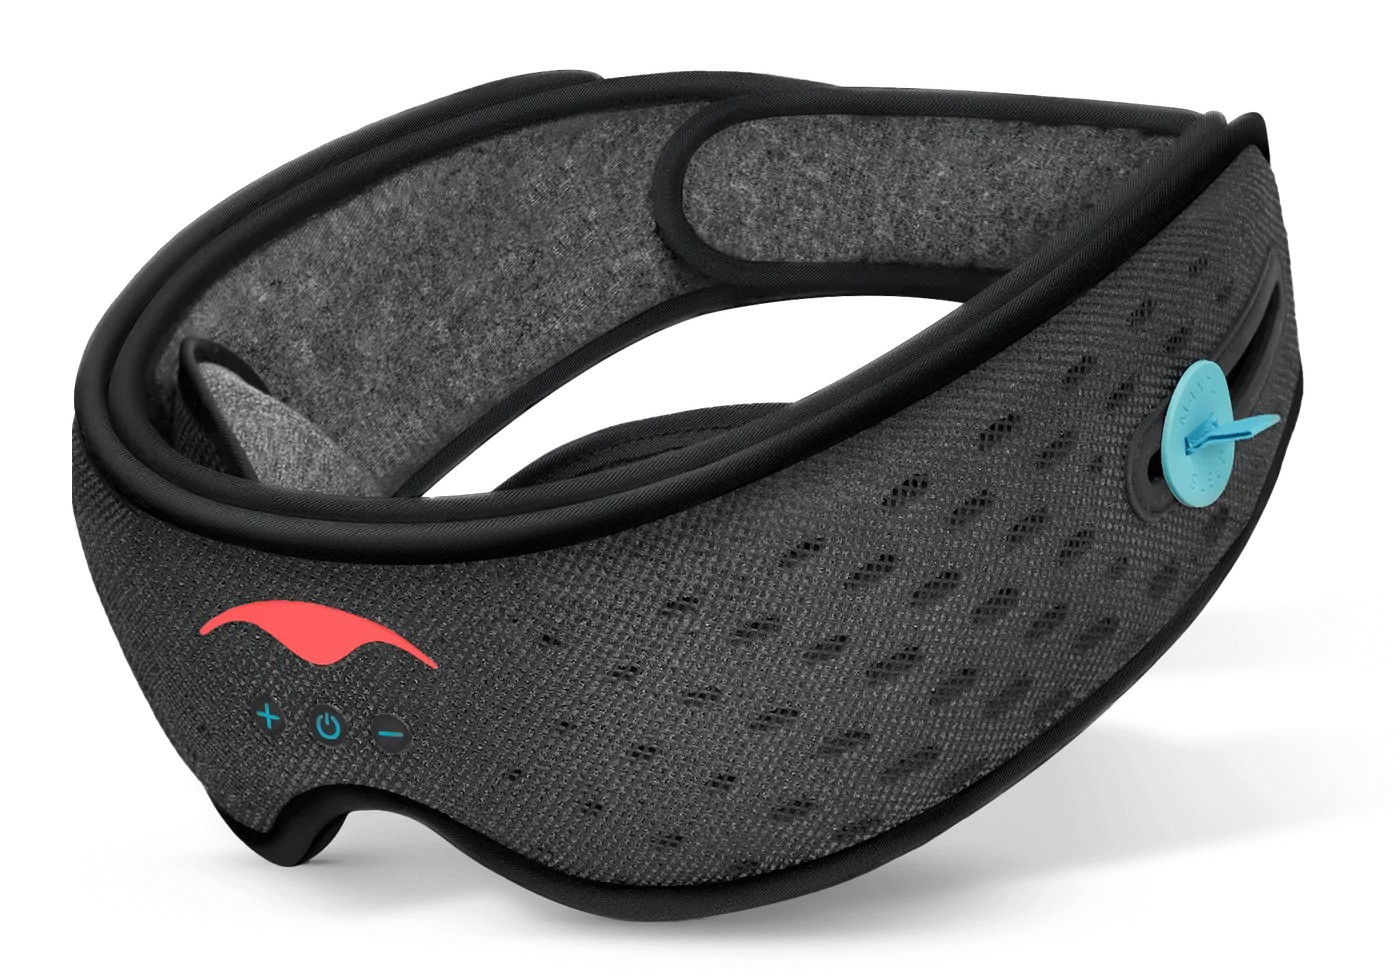 A black sleep mask with headphones with C-shaped eye cups.